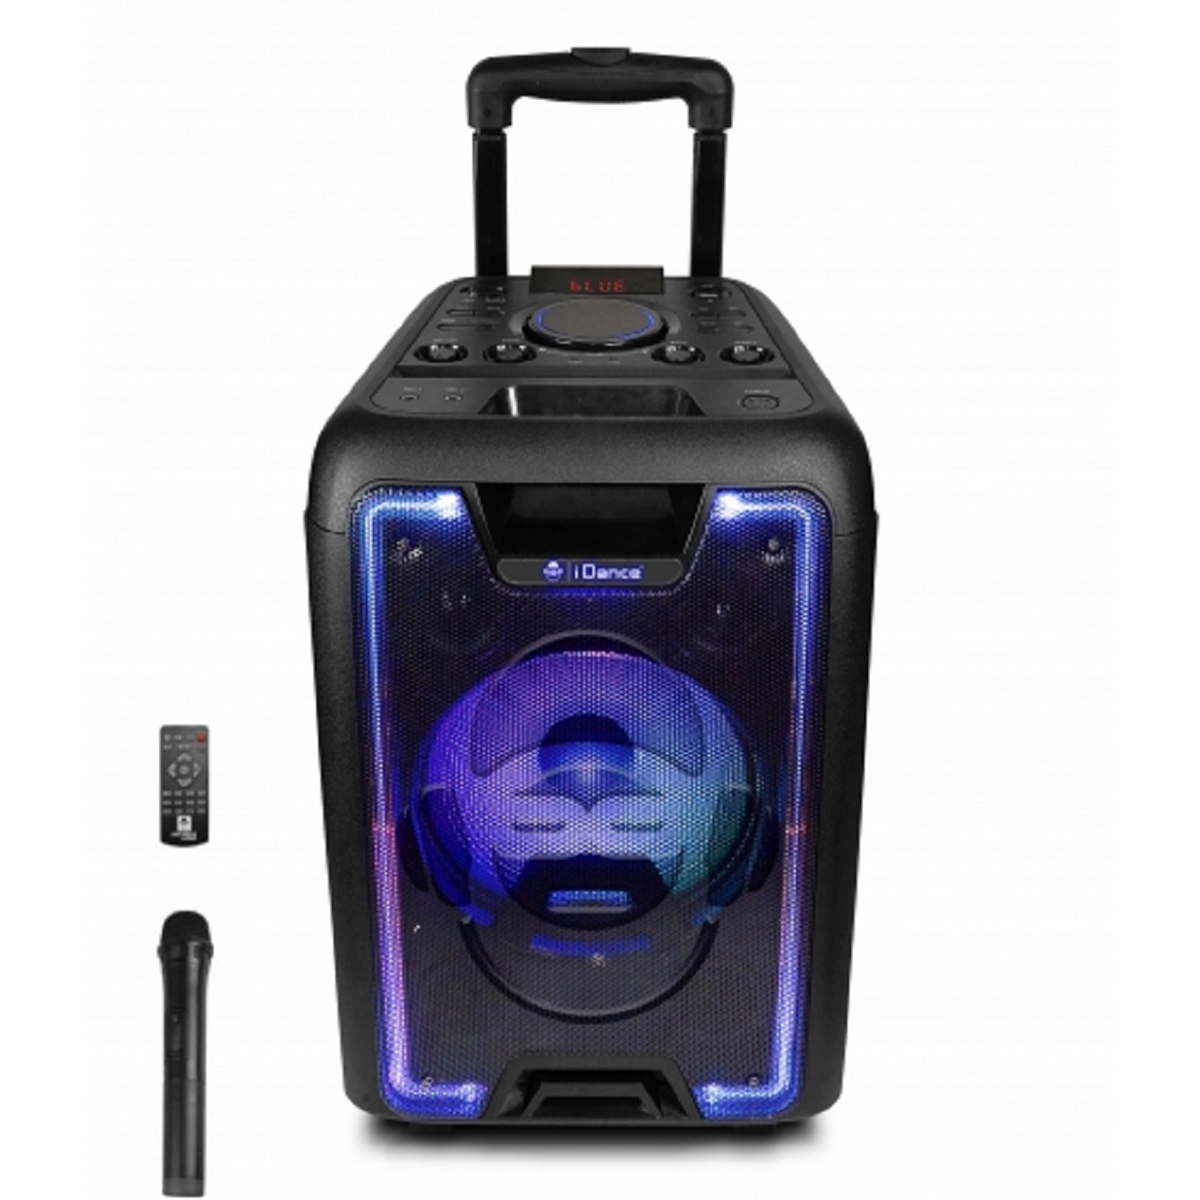 iDance Megabox 1000, 200W Portable Bluetooth Sound and Light Party System